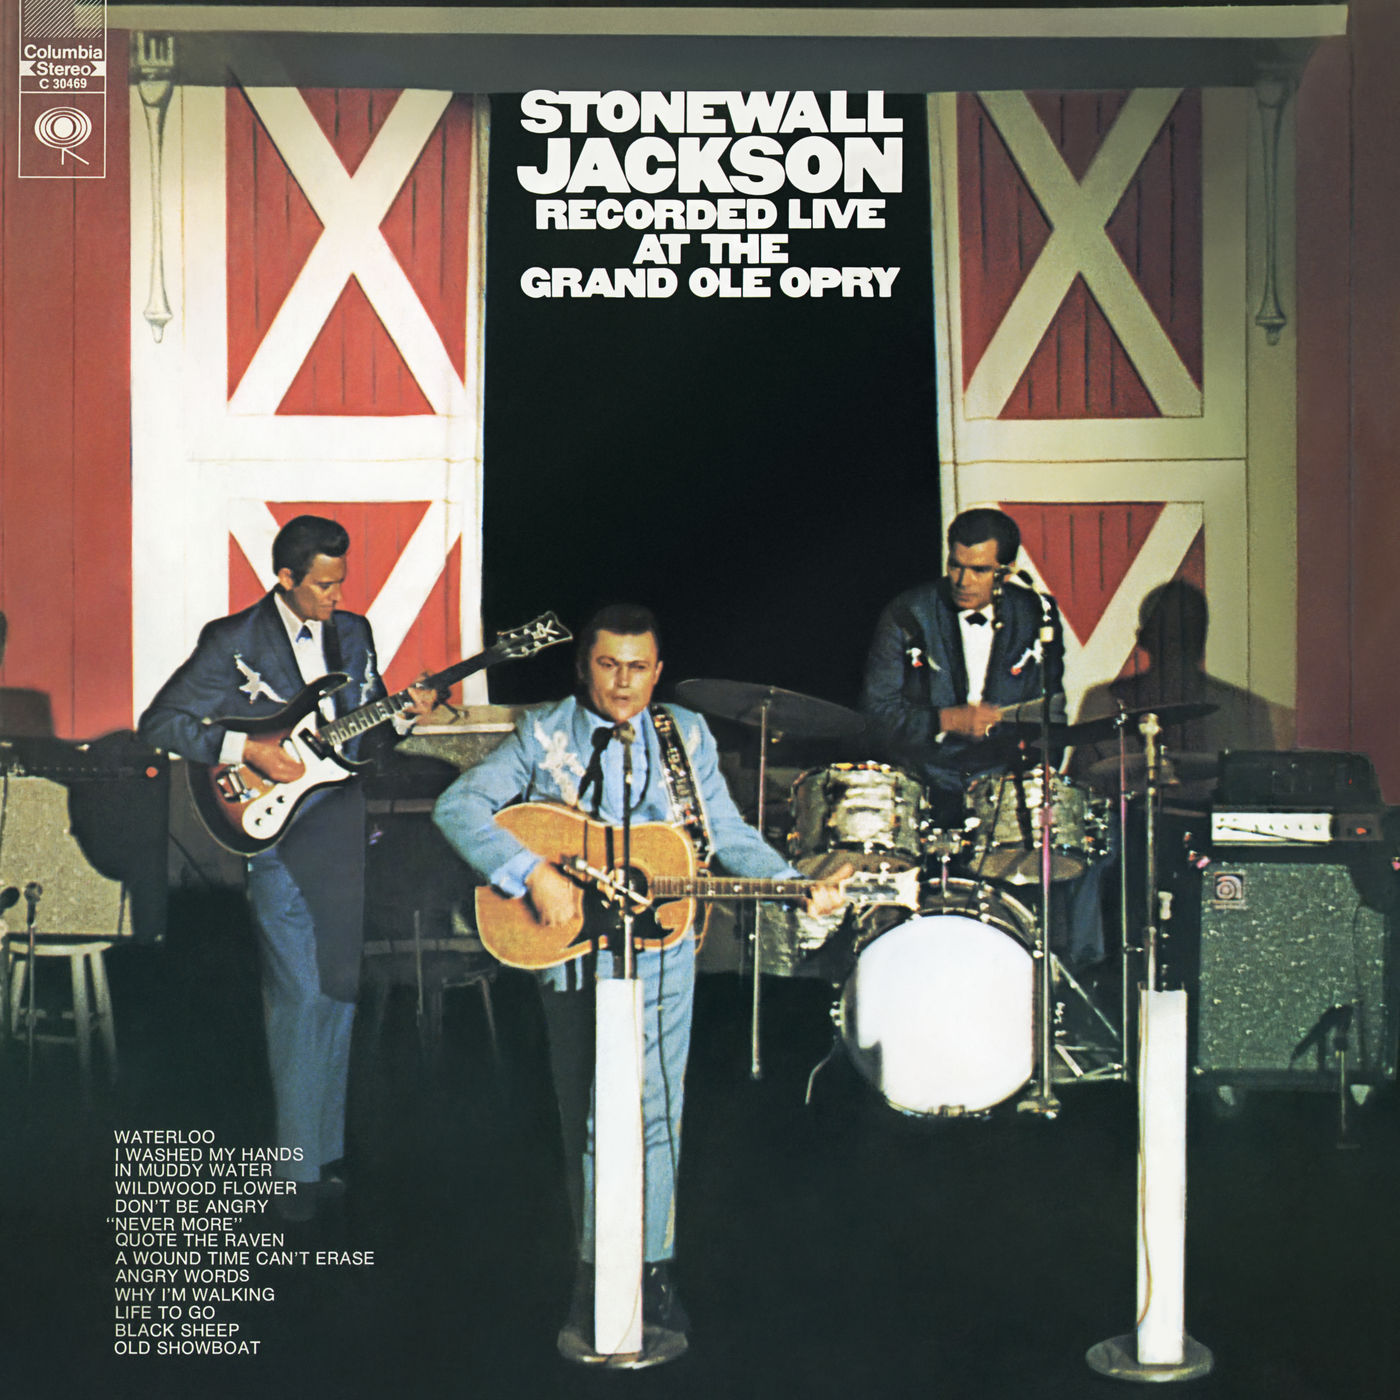 Stonewall Jackson – Recorded Live at The Grand Ole Opry